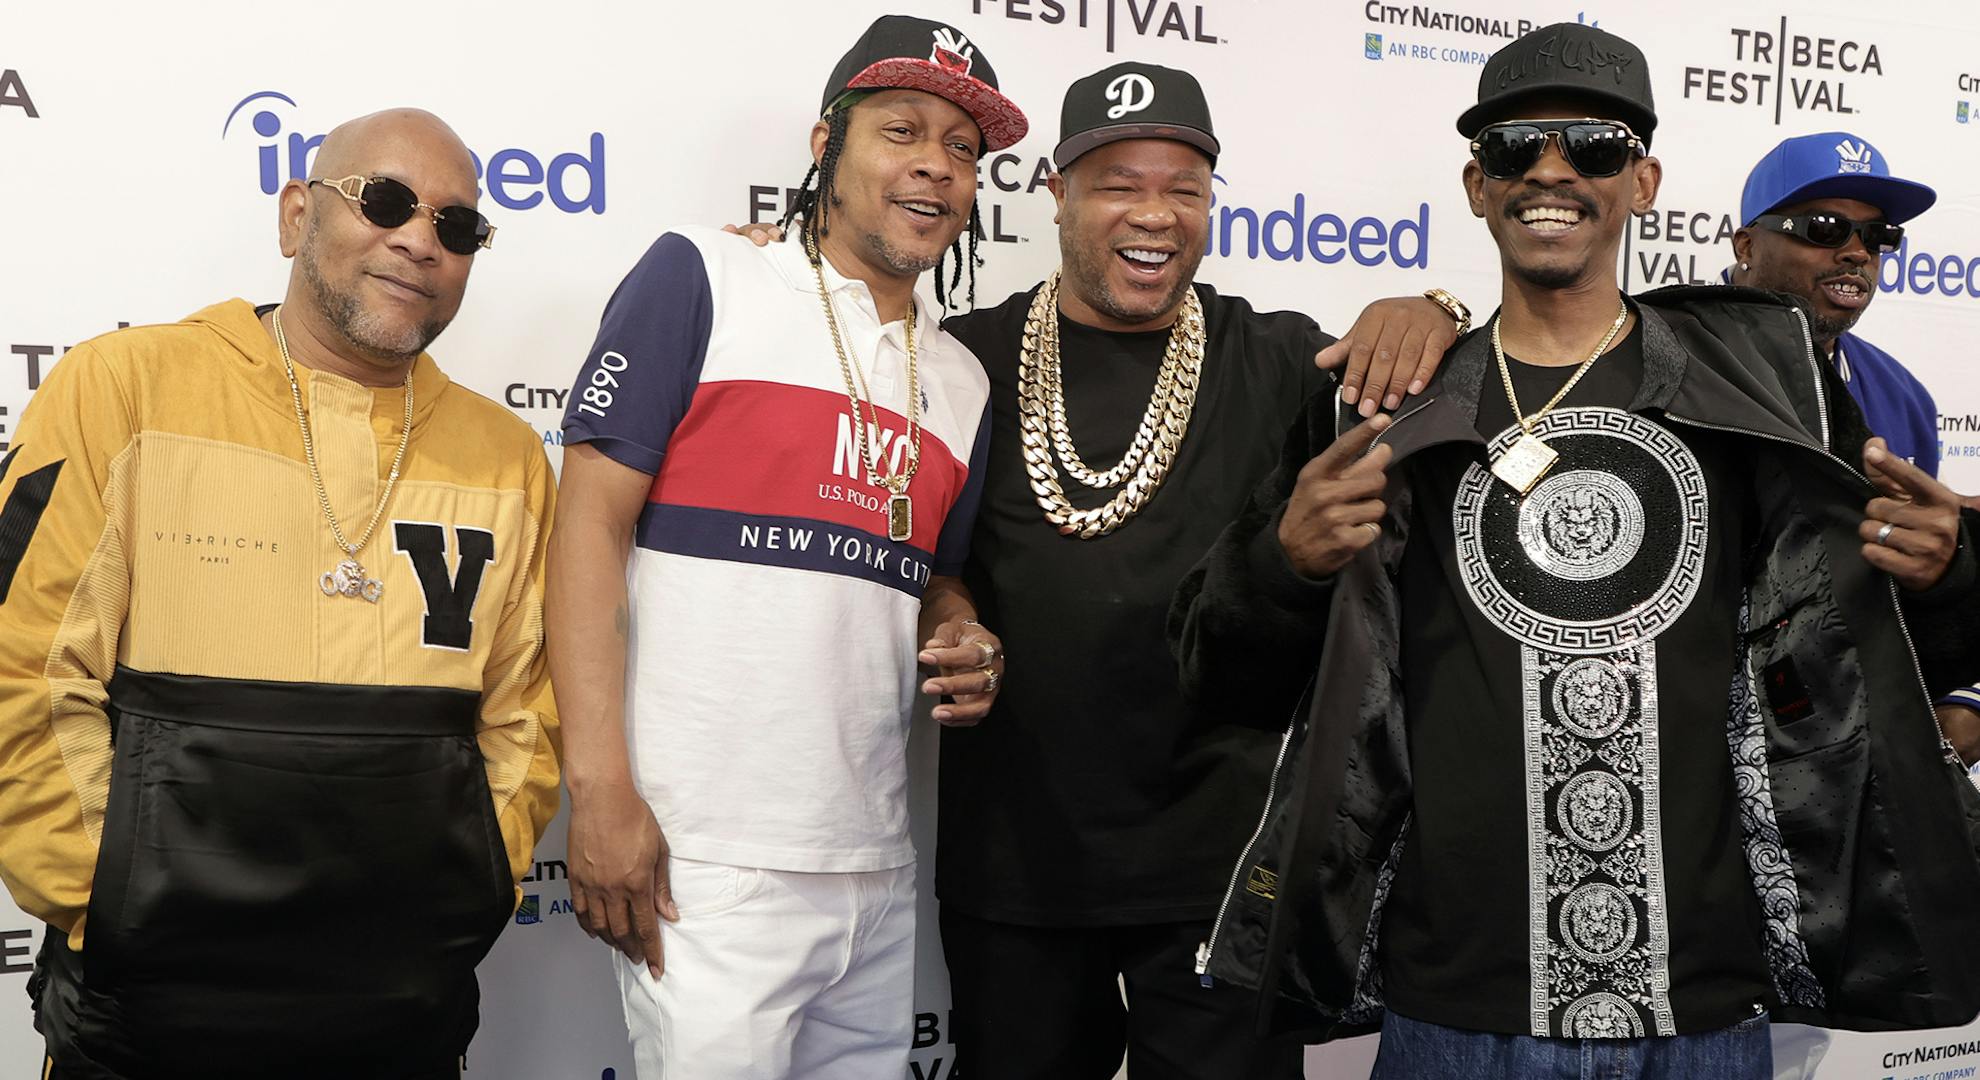 DJ Quik, Xzibit, Kurupt, and Daz pose with cast and crew at the "The DOC" premiere during the 2022 Tribeca Festival at Beacon Theatre on June 10, 2022 in New York City. (Photo by Michael Loccisano/Getty Images for Tribeca Festival )